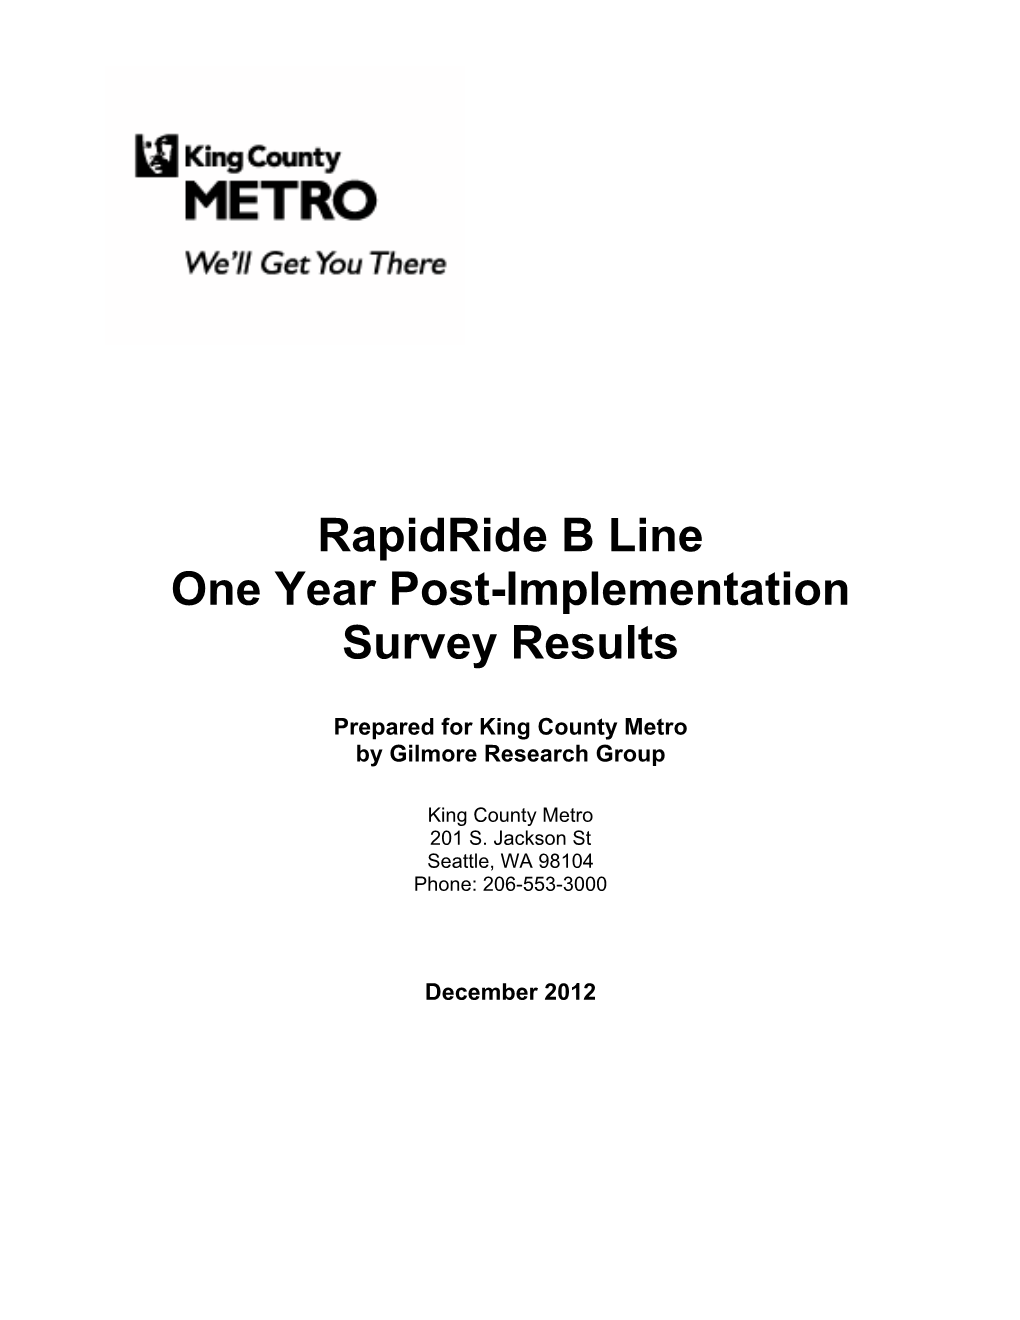 Rapidride B Line One Year Post-Implementation Survey Results